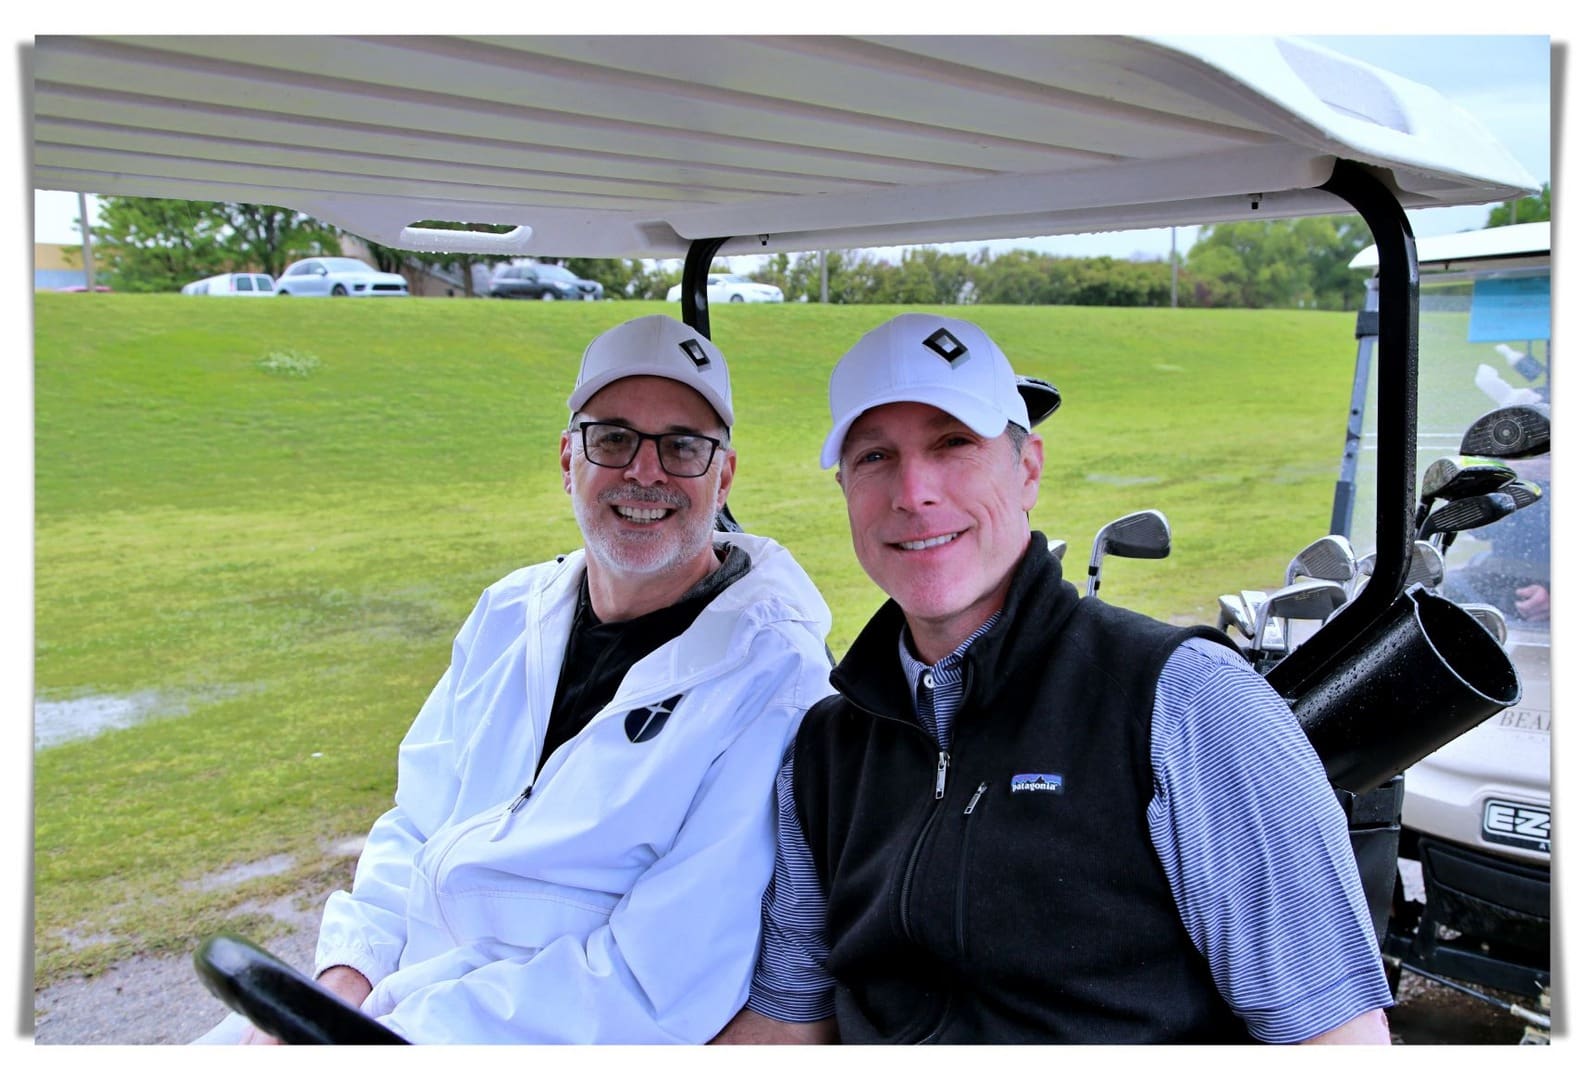 Two men smiling while sitting in a golf cart.